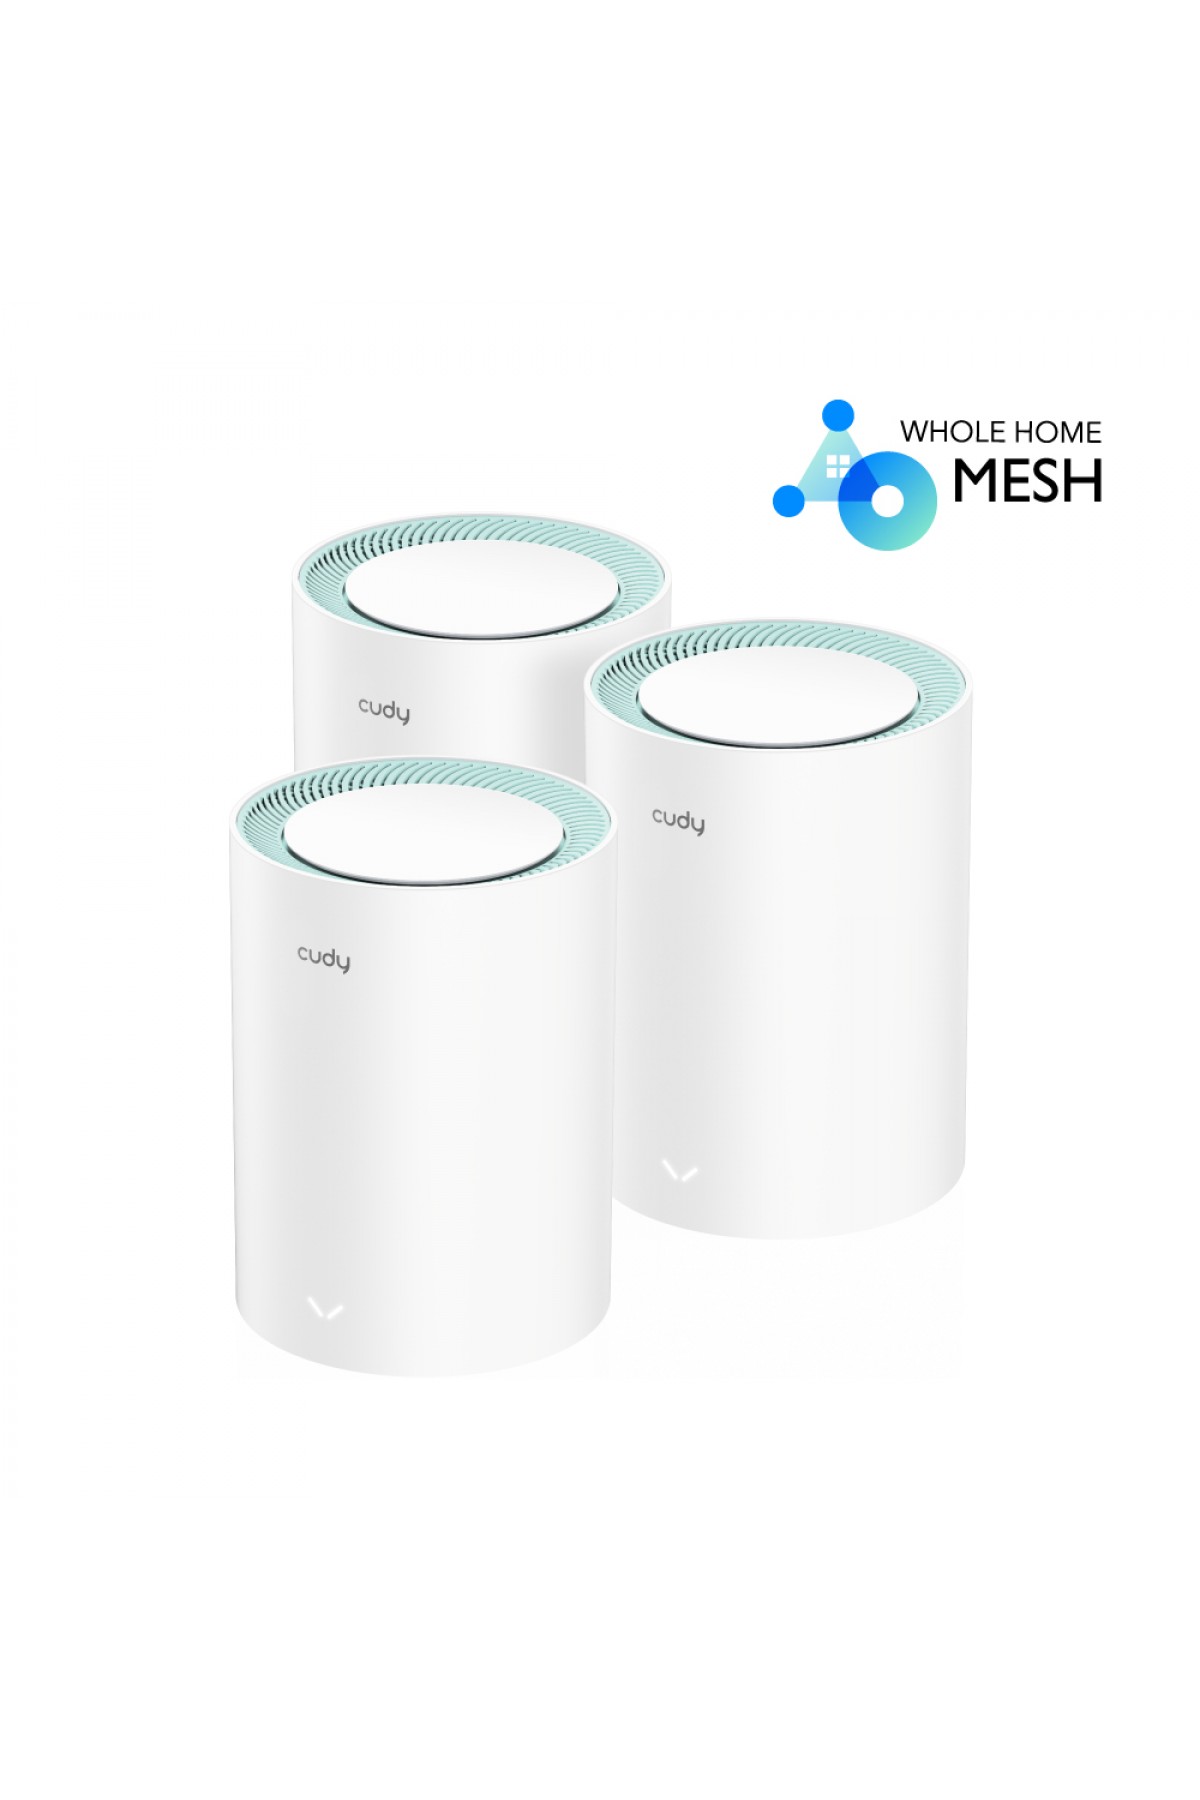 AC1200 Dual Band Whole Home Wi-Fi Mesh System, Model: M1300 3-Pack